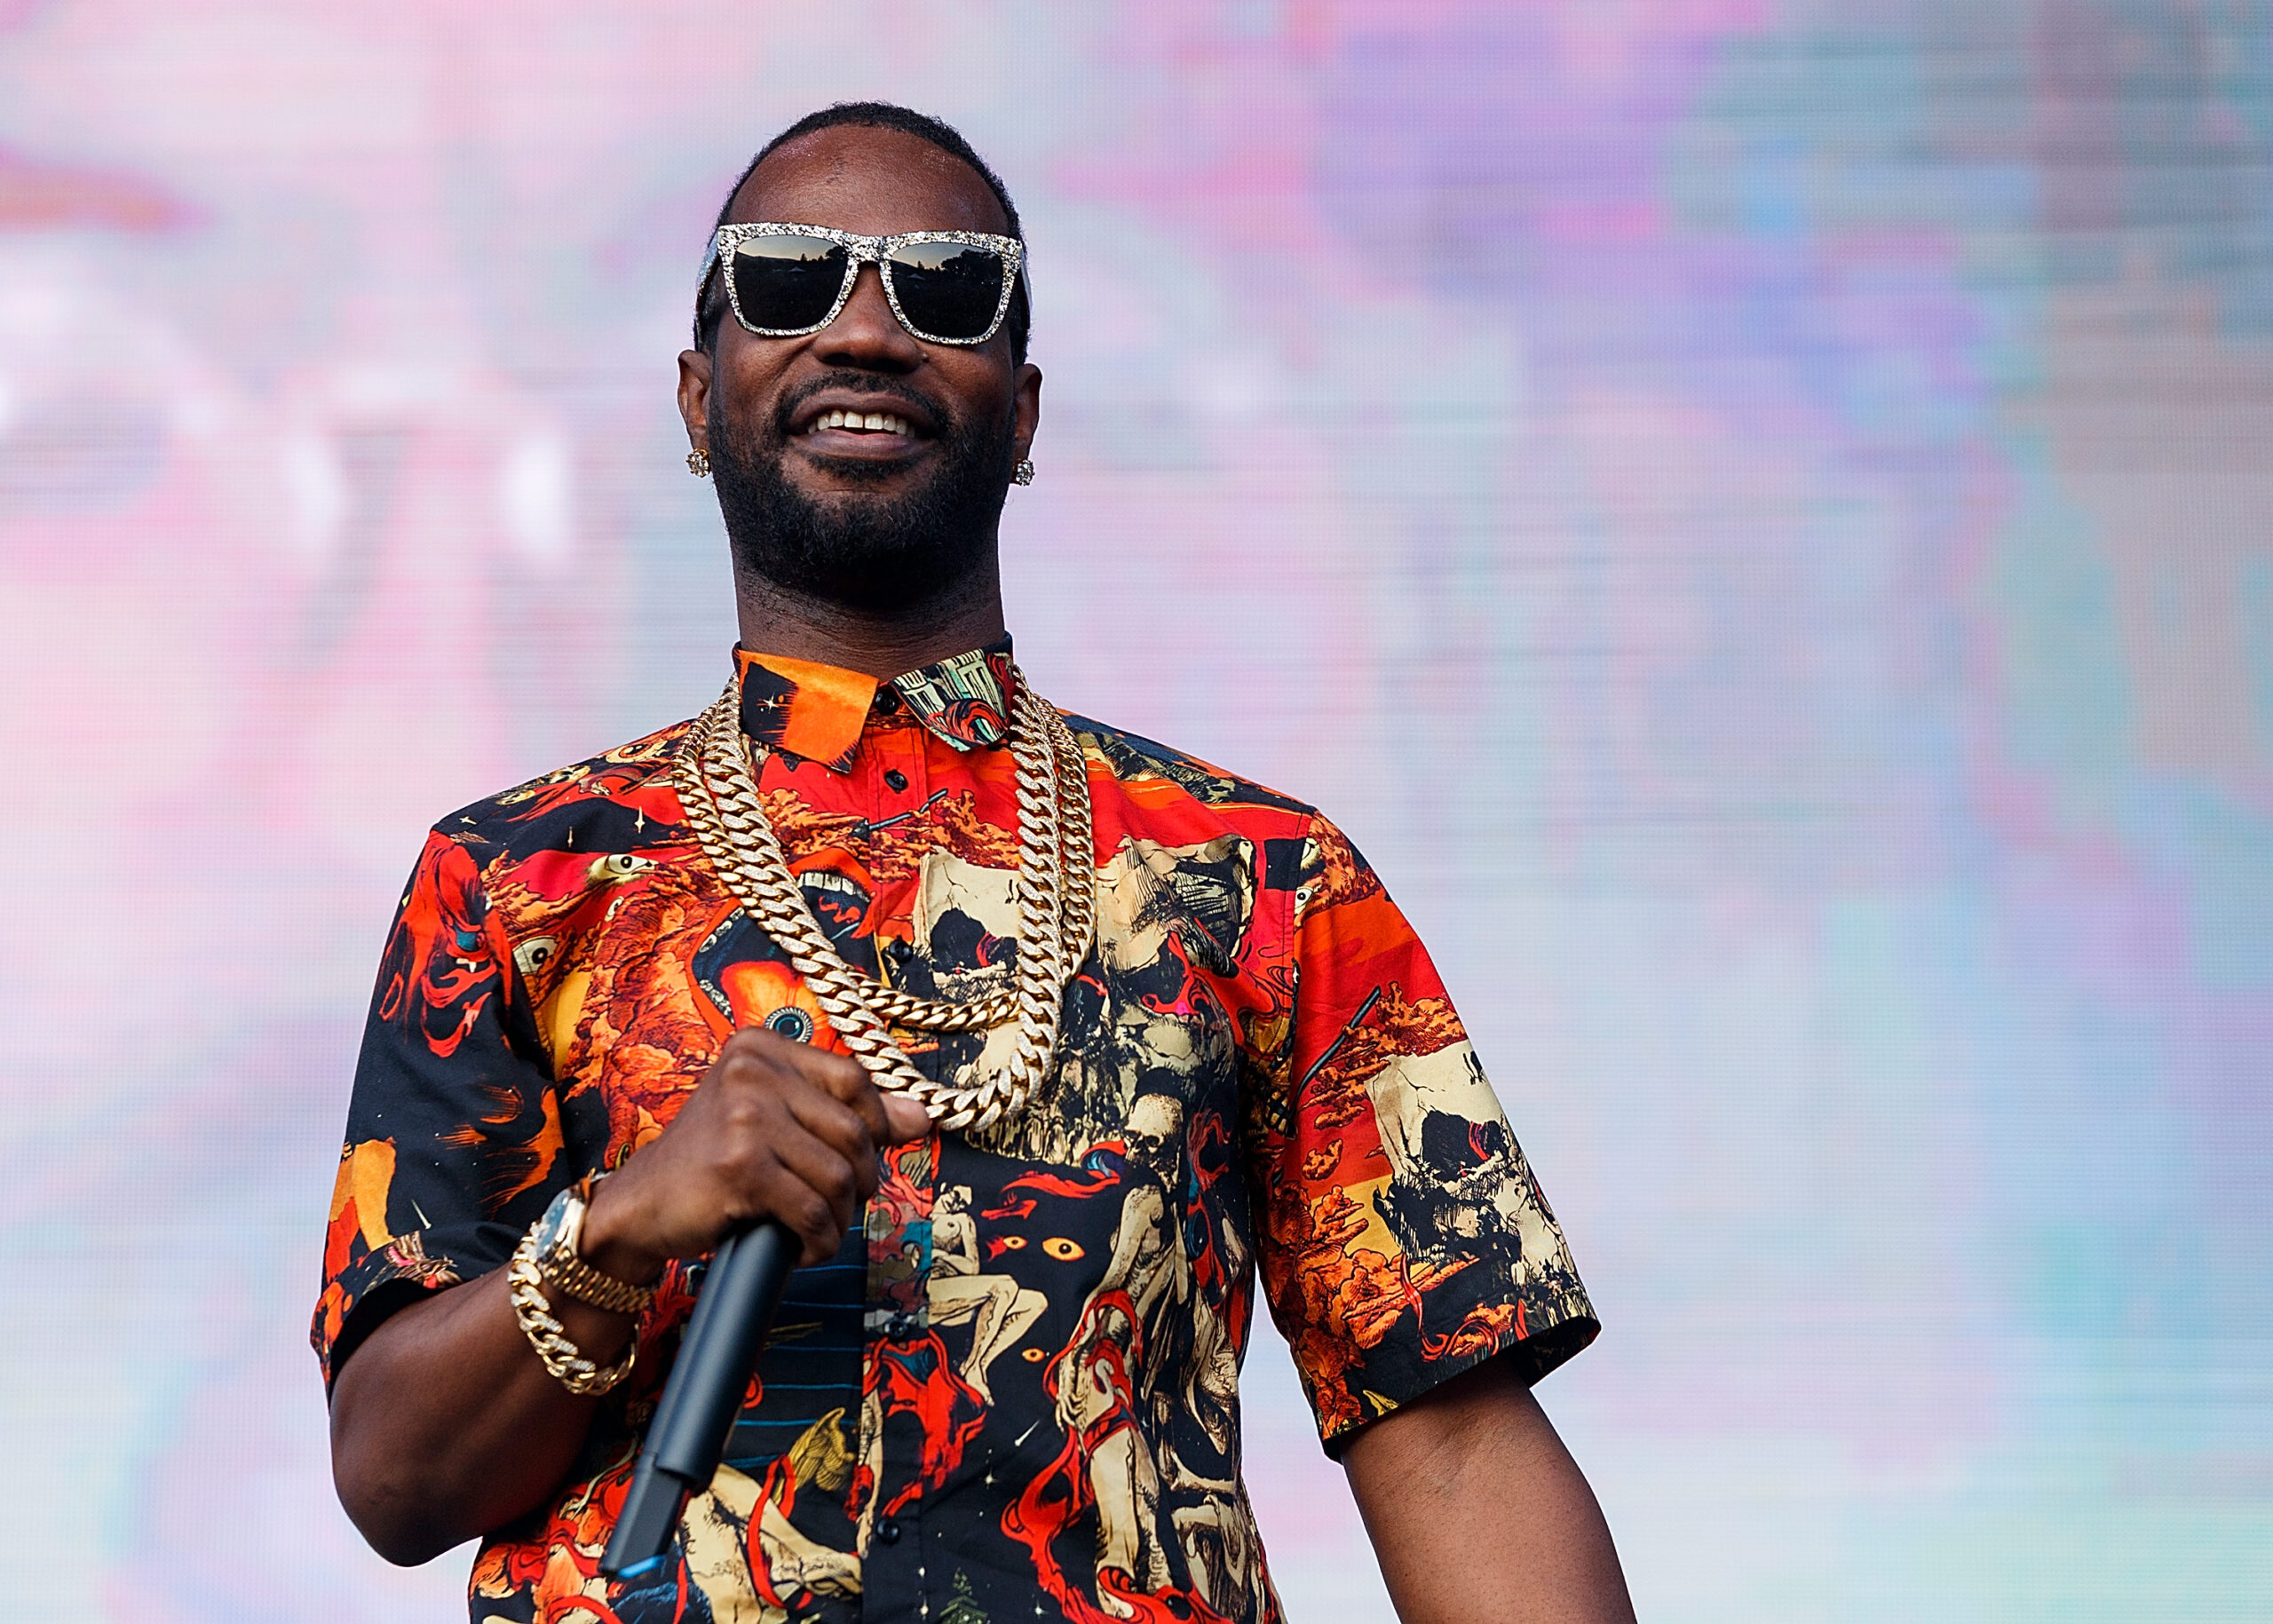 Juicy J Claims Mac Miller Brought “Every Kind Of Drug You Can Take” To The Studio Prior To His Death